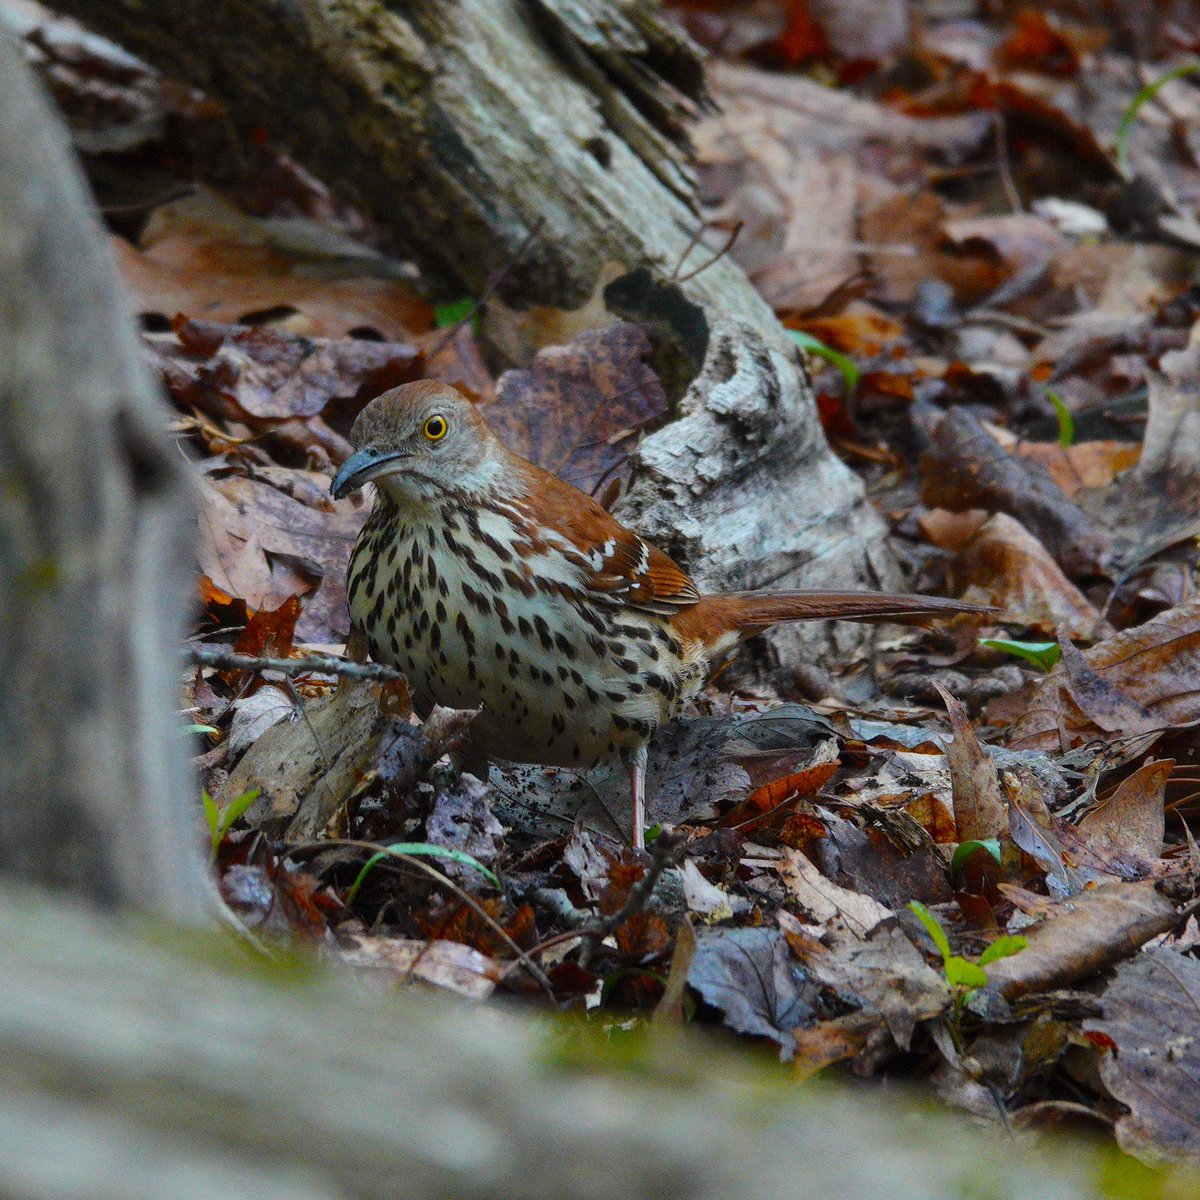 Brown Thrasher, the ramble. I don’t see as many Brown Thrasher as I used to, so it’s always terrific to get a glimpse of these wary birds. #songbirds #birding #centralpark #birds #birdcp #birdcpp #urbanbirding  #nycbirds #birdsofcentralpark #instabirds #birdsofnyc